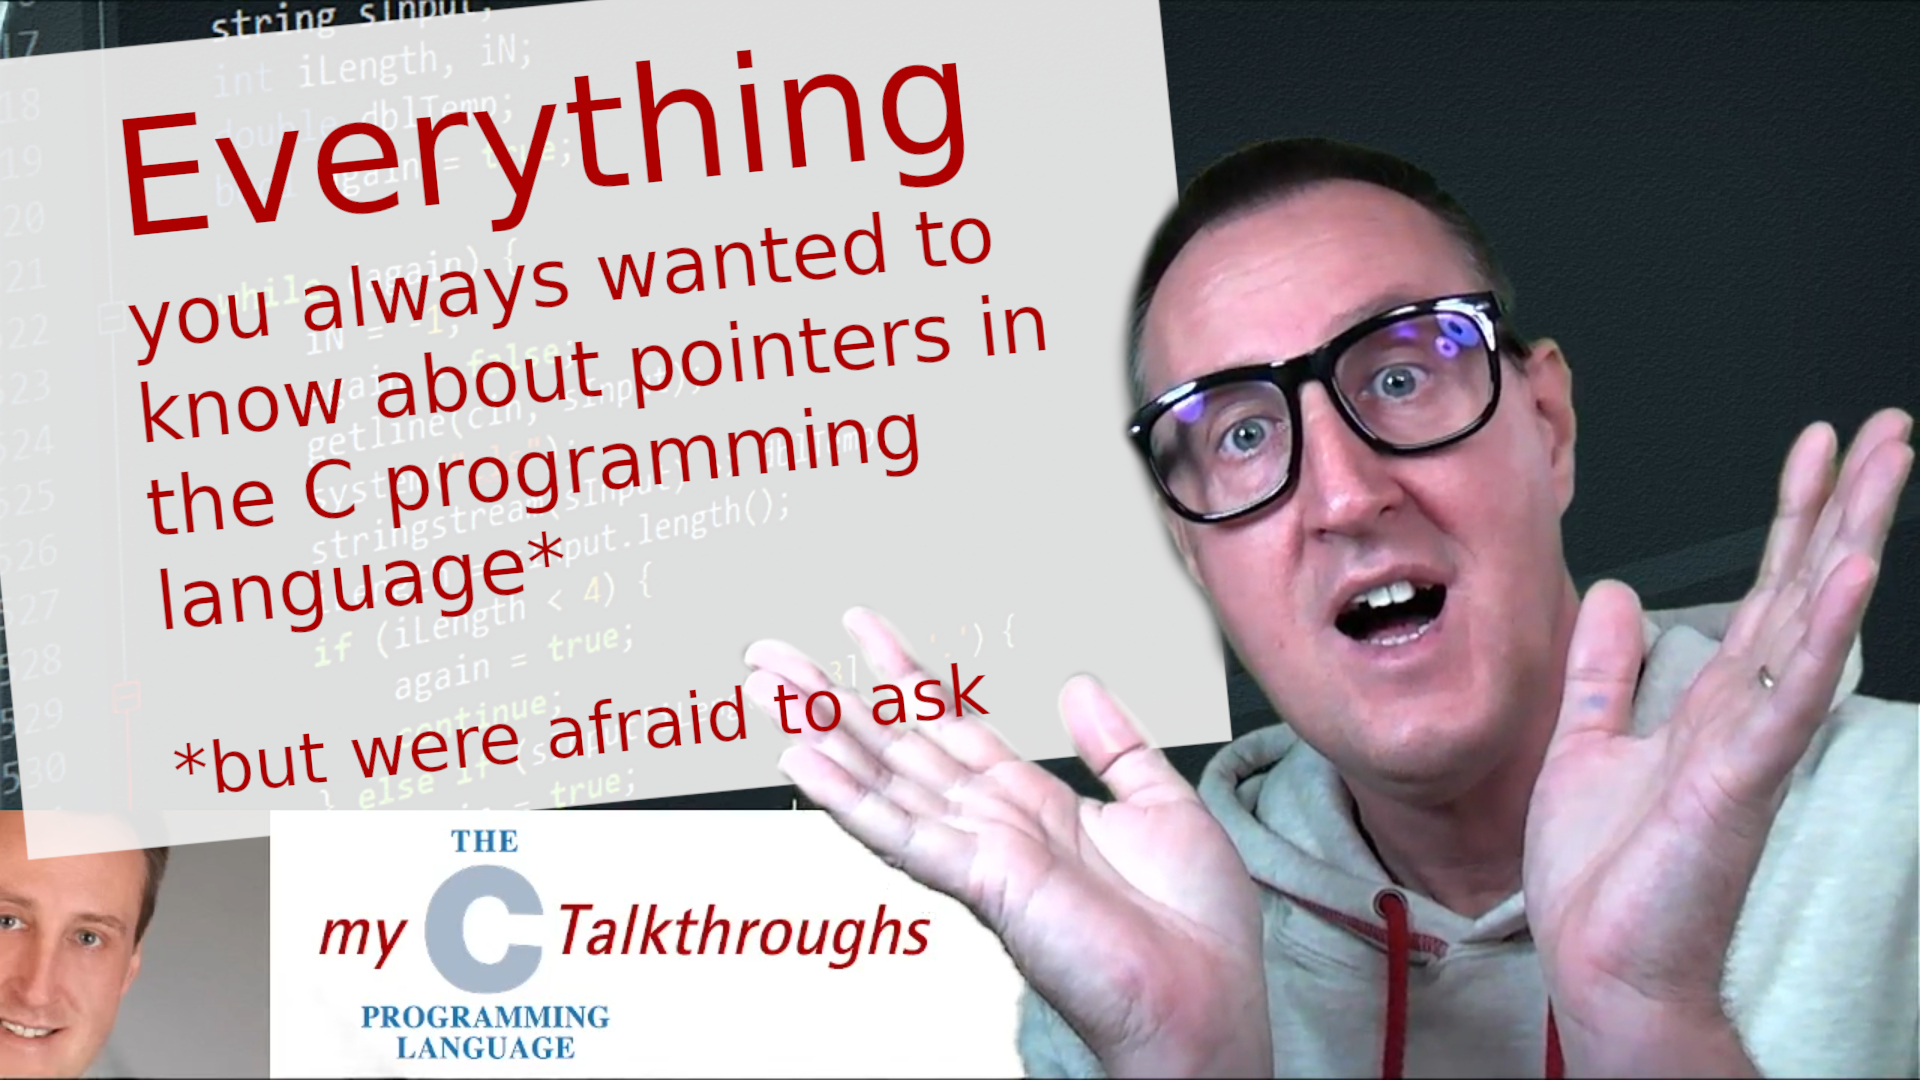 Everything you always wanted to know about pointers in C programming but were afraid to ask